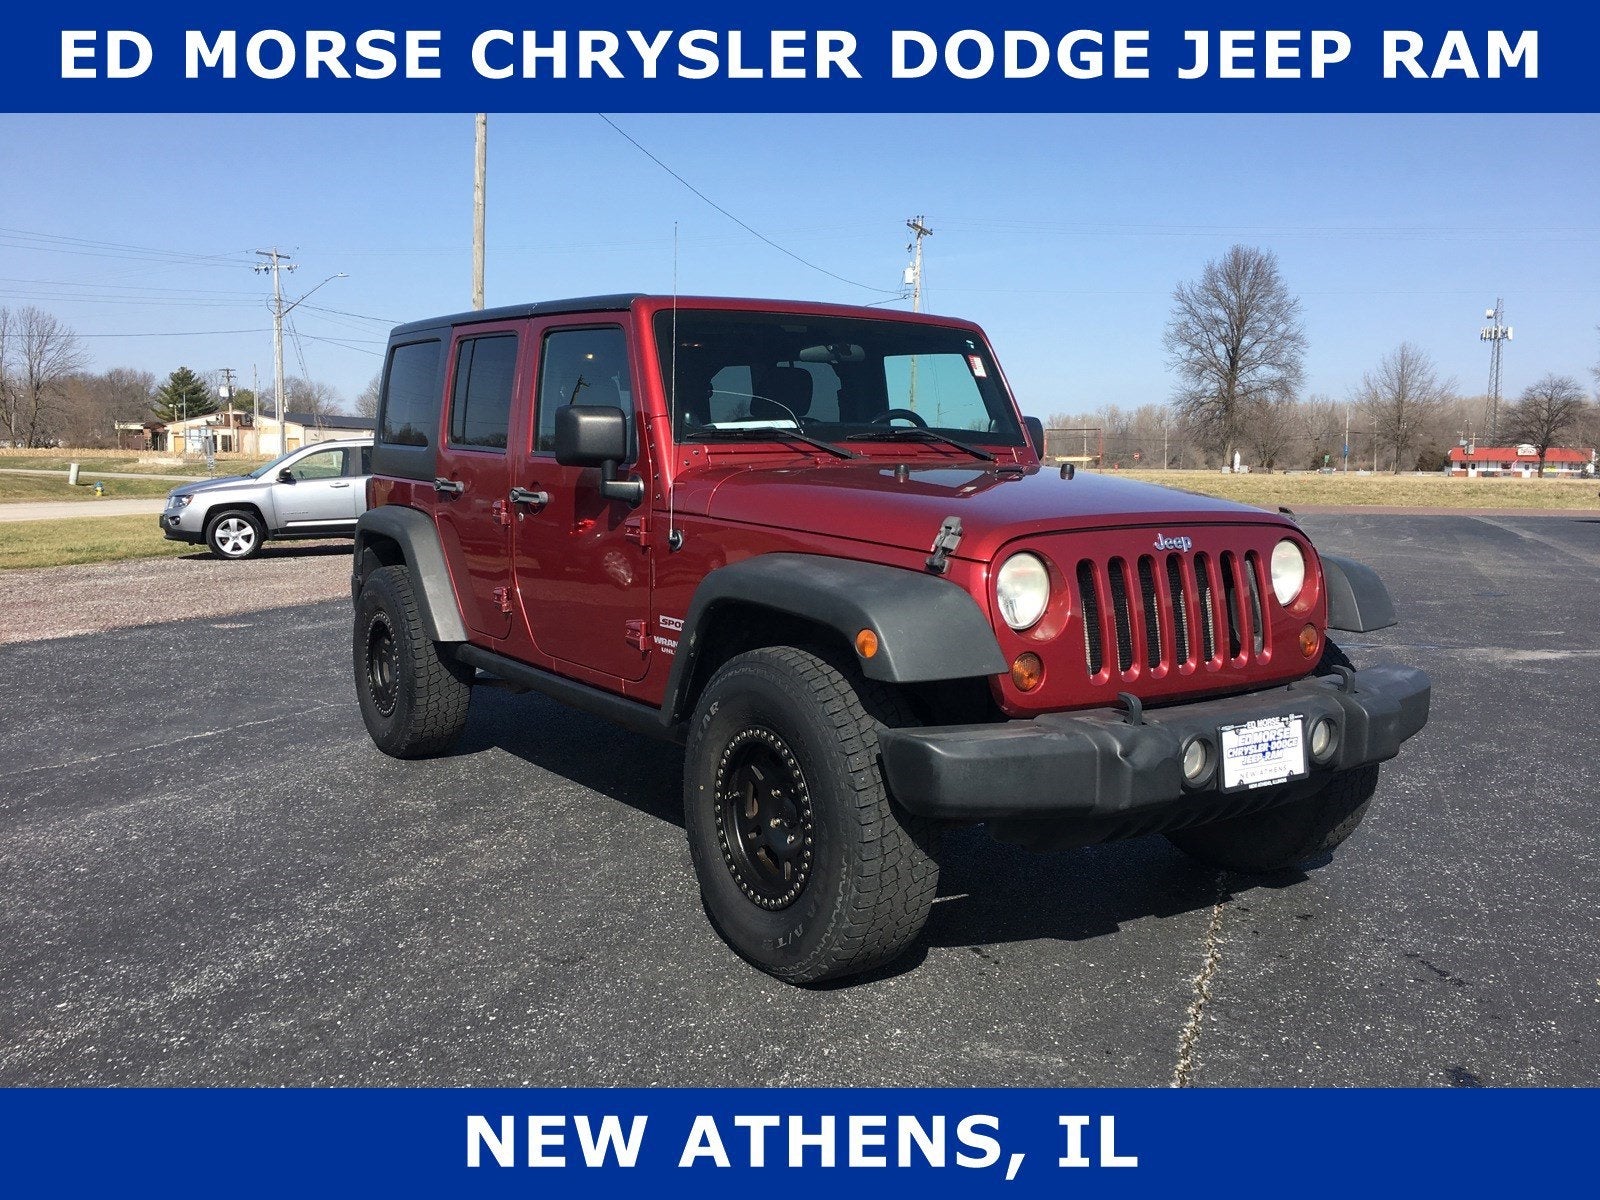 2011 Jeep Wrangler Unlimited Sport in New Athens, IL | St. Louis Jeep  Wrangler Unlimited | Ed Morse Chrysler Dodge Jeep Ram New Athens